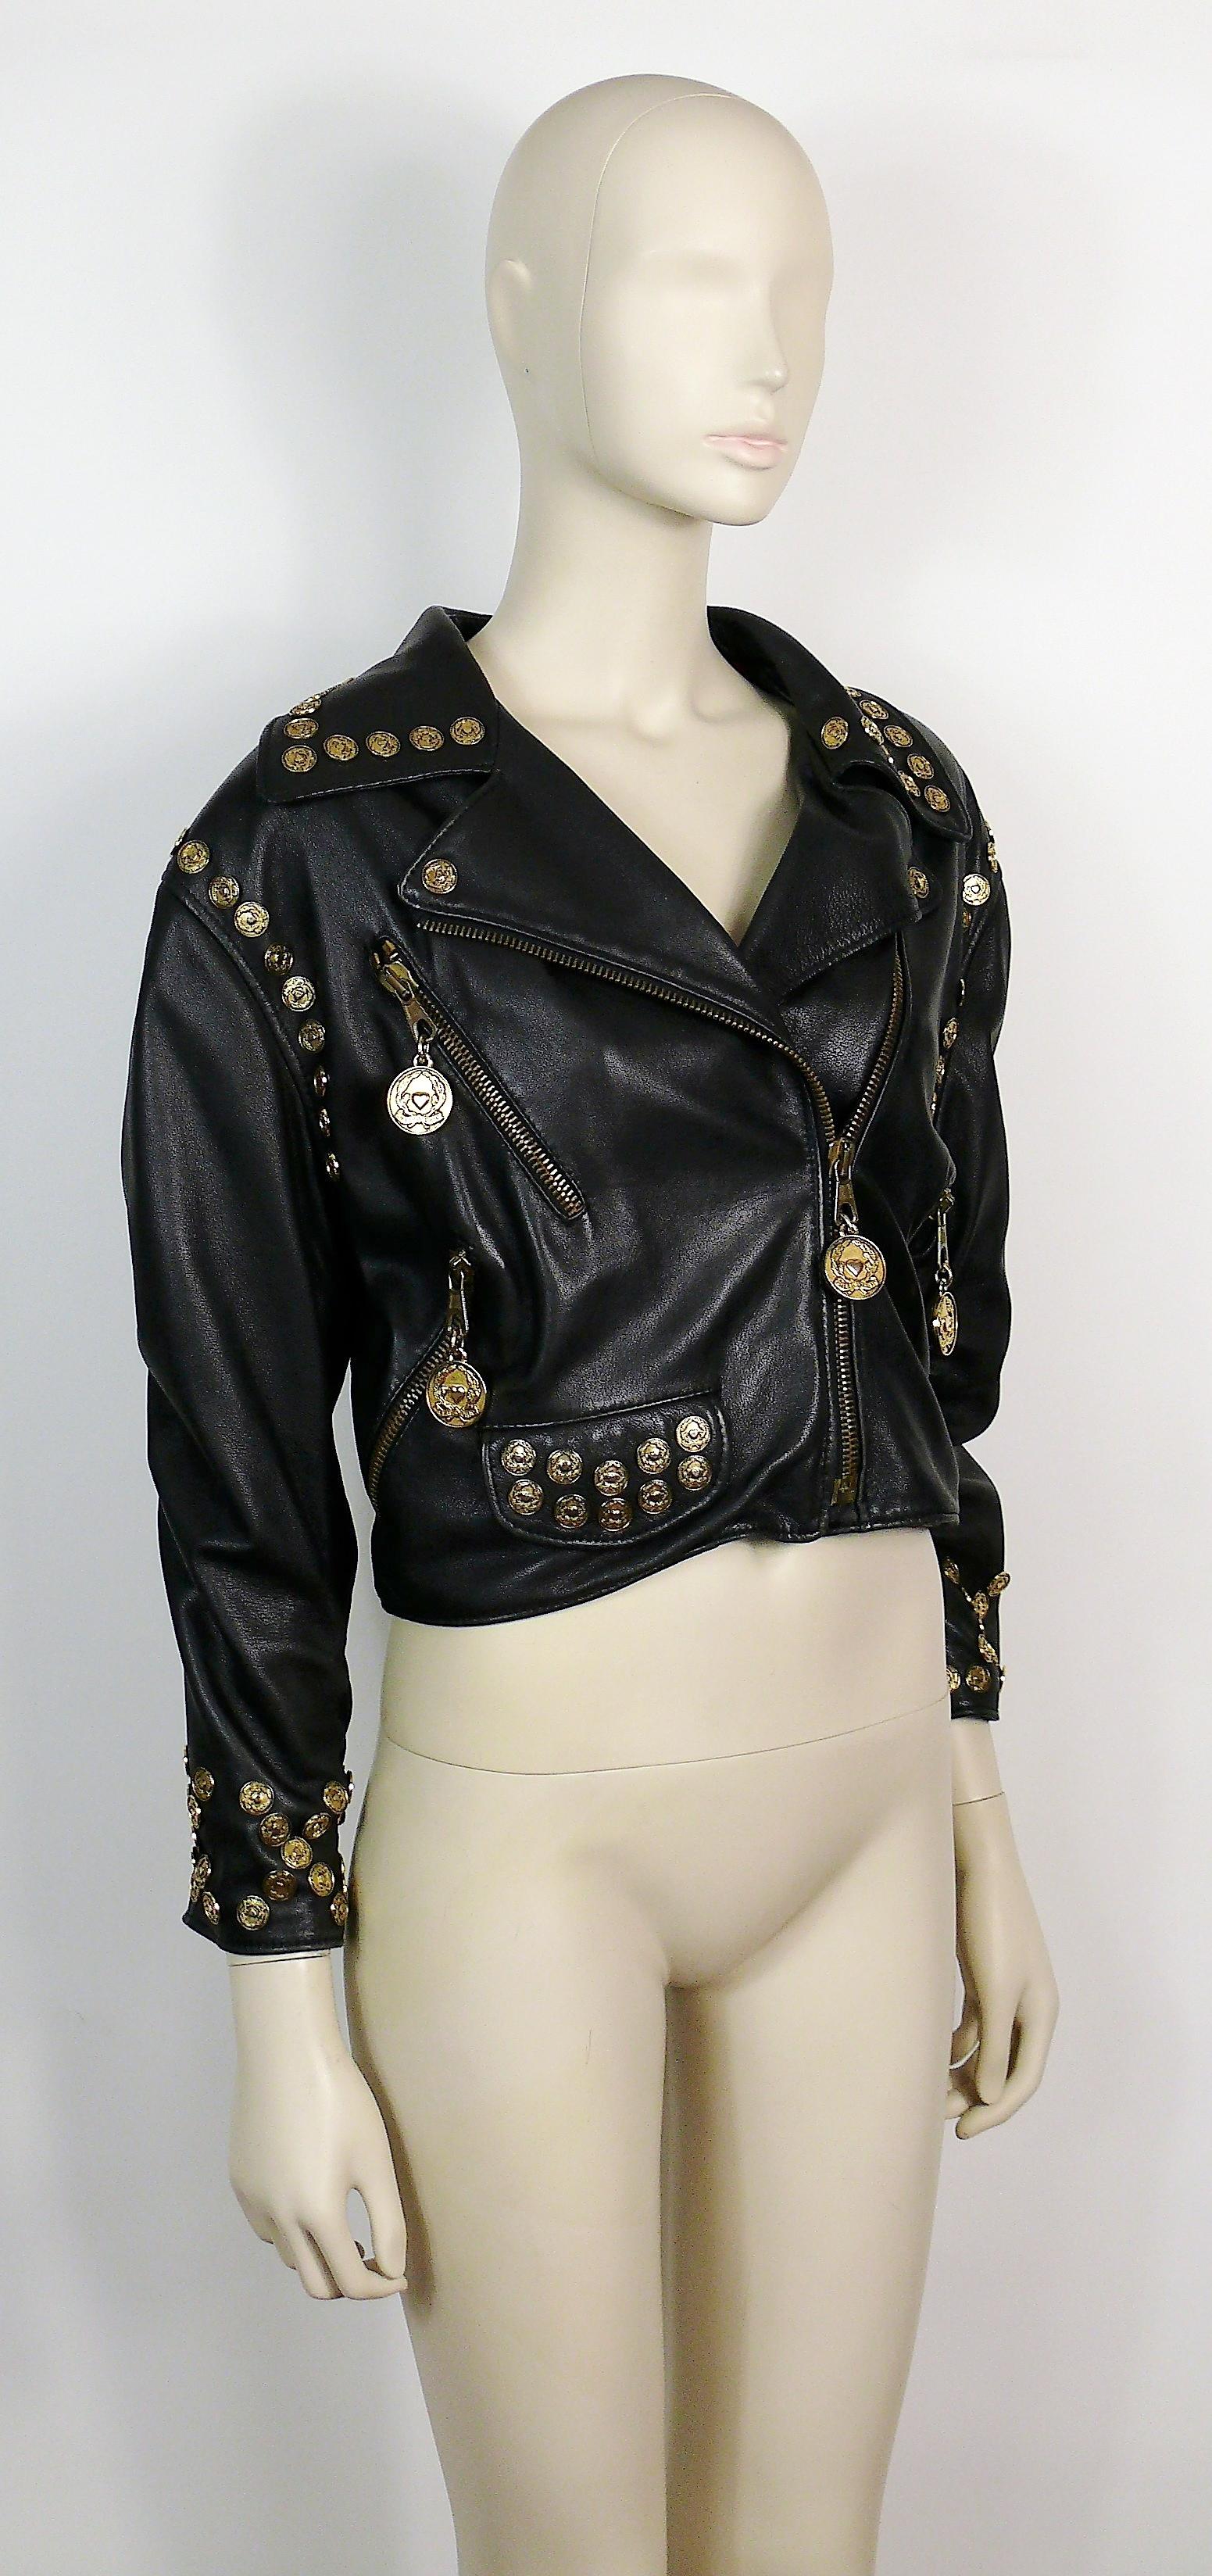 MOSCHINO vintage black cropped biker leather jacket embellished with antiqued gold tone coins.

This jacket features :
- Black leather embellished with antiqued CHEAP AND CHIC signature gold tone coins.
- Message 